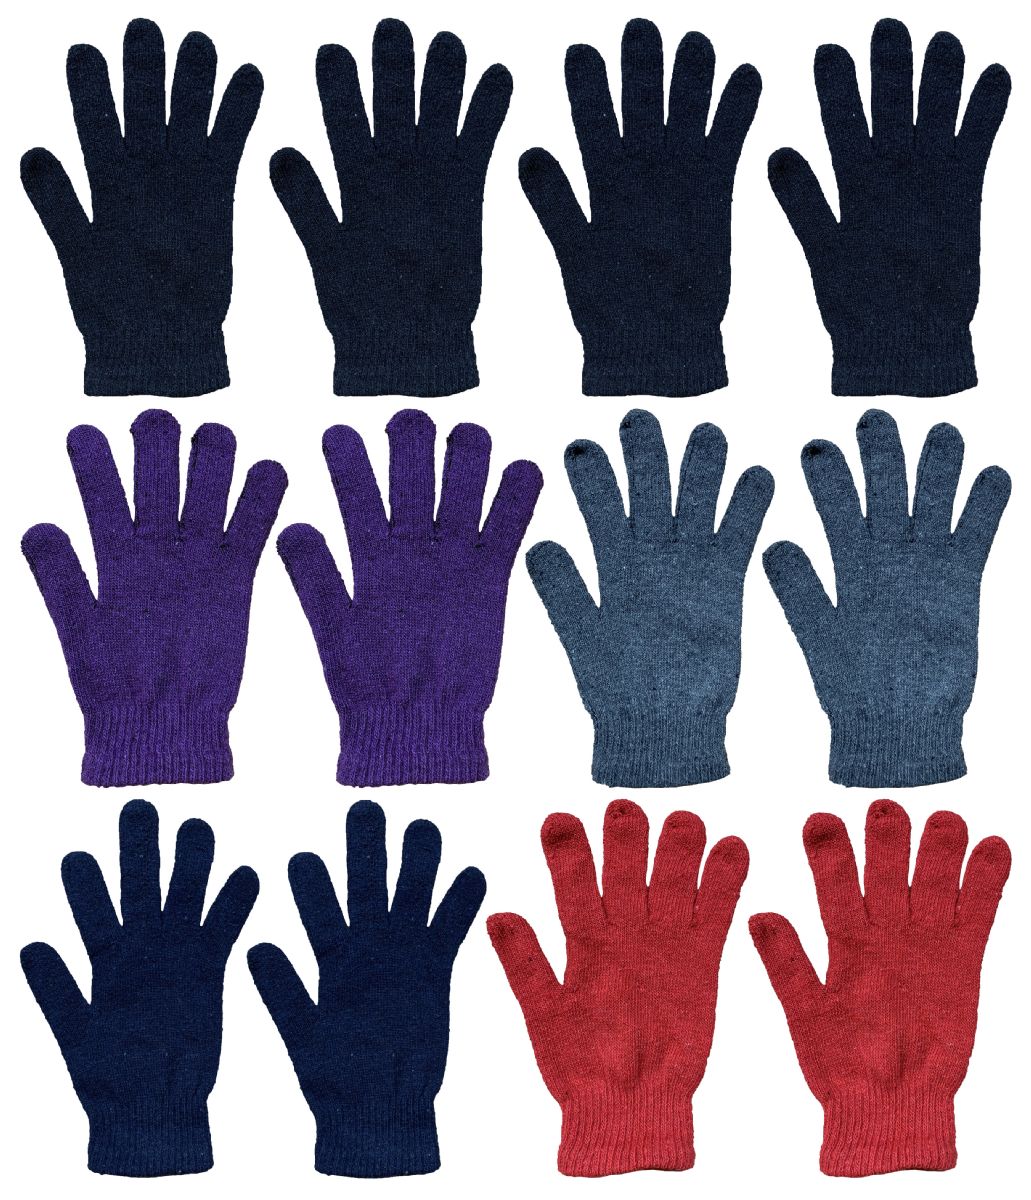 60 Wholesale Yacht & Smith Kids Warm Winter Colorful Magic Stretch Gloves Ages 2-8 Bulk Pack